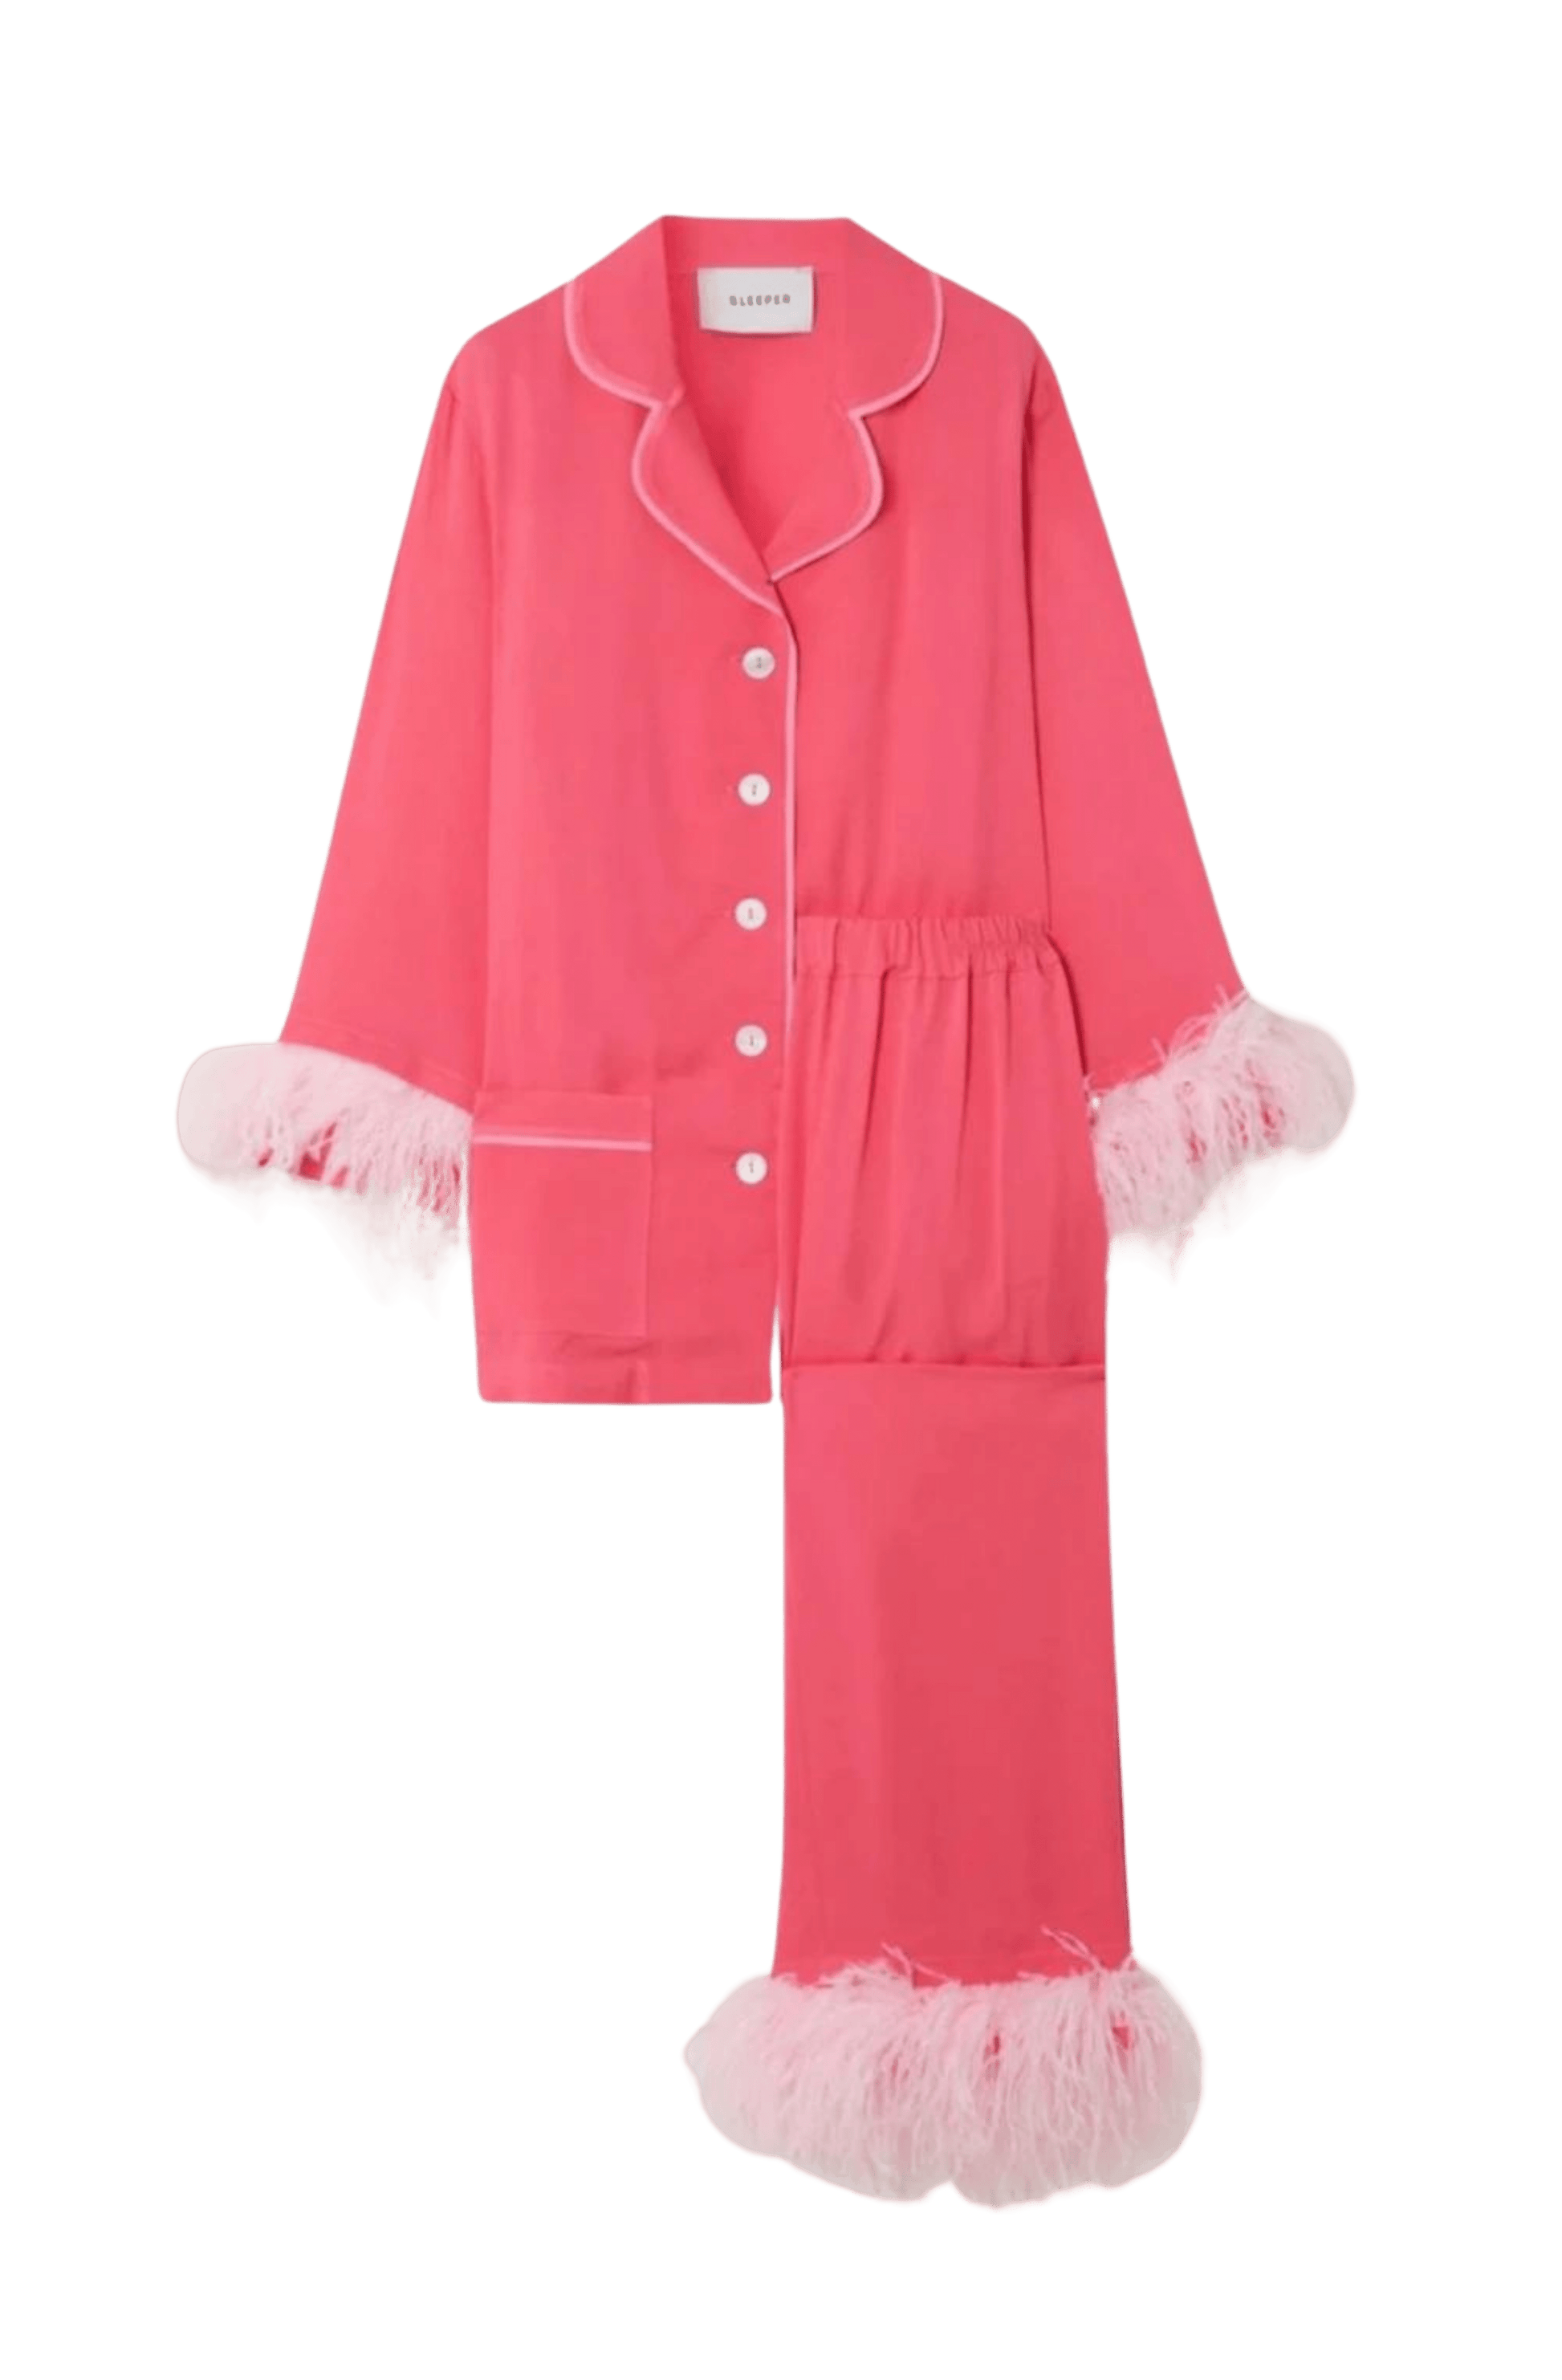  Sleeper pyjama party feather set in coral & pink. Limited Edition and Exclusive to Net-a-Porter.com Sold Out